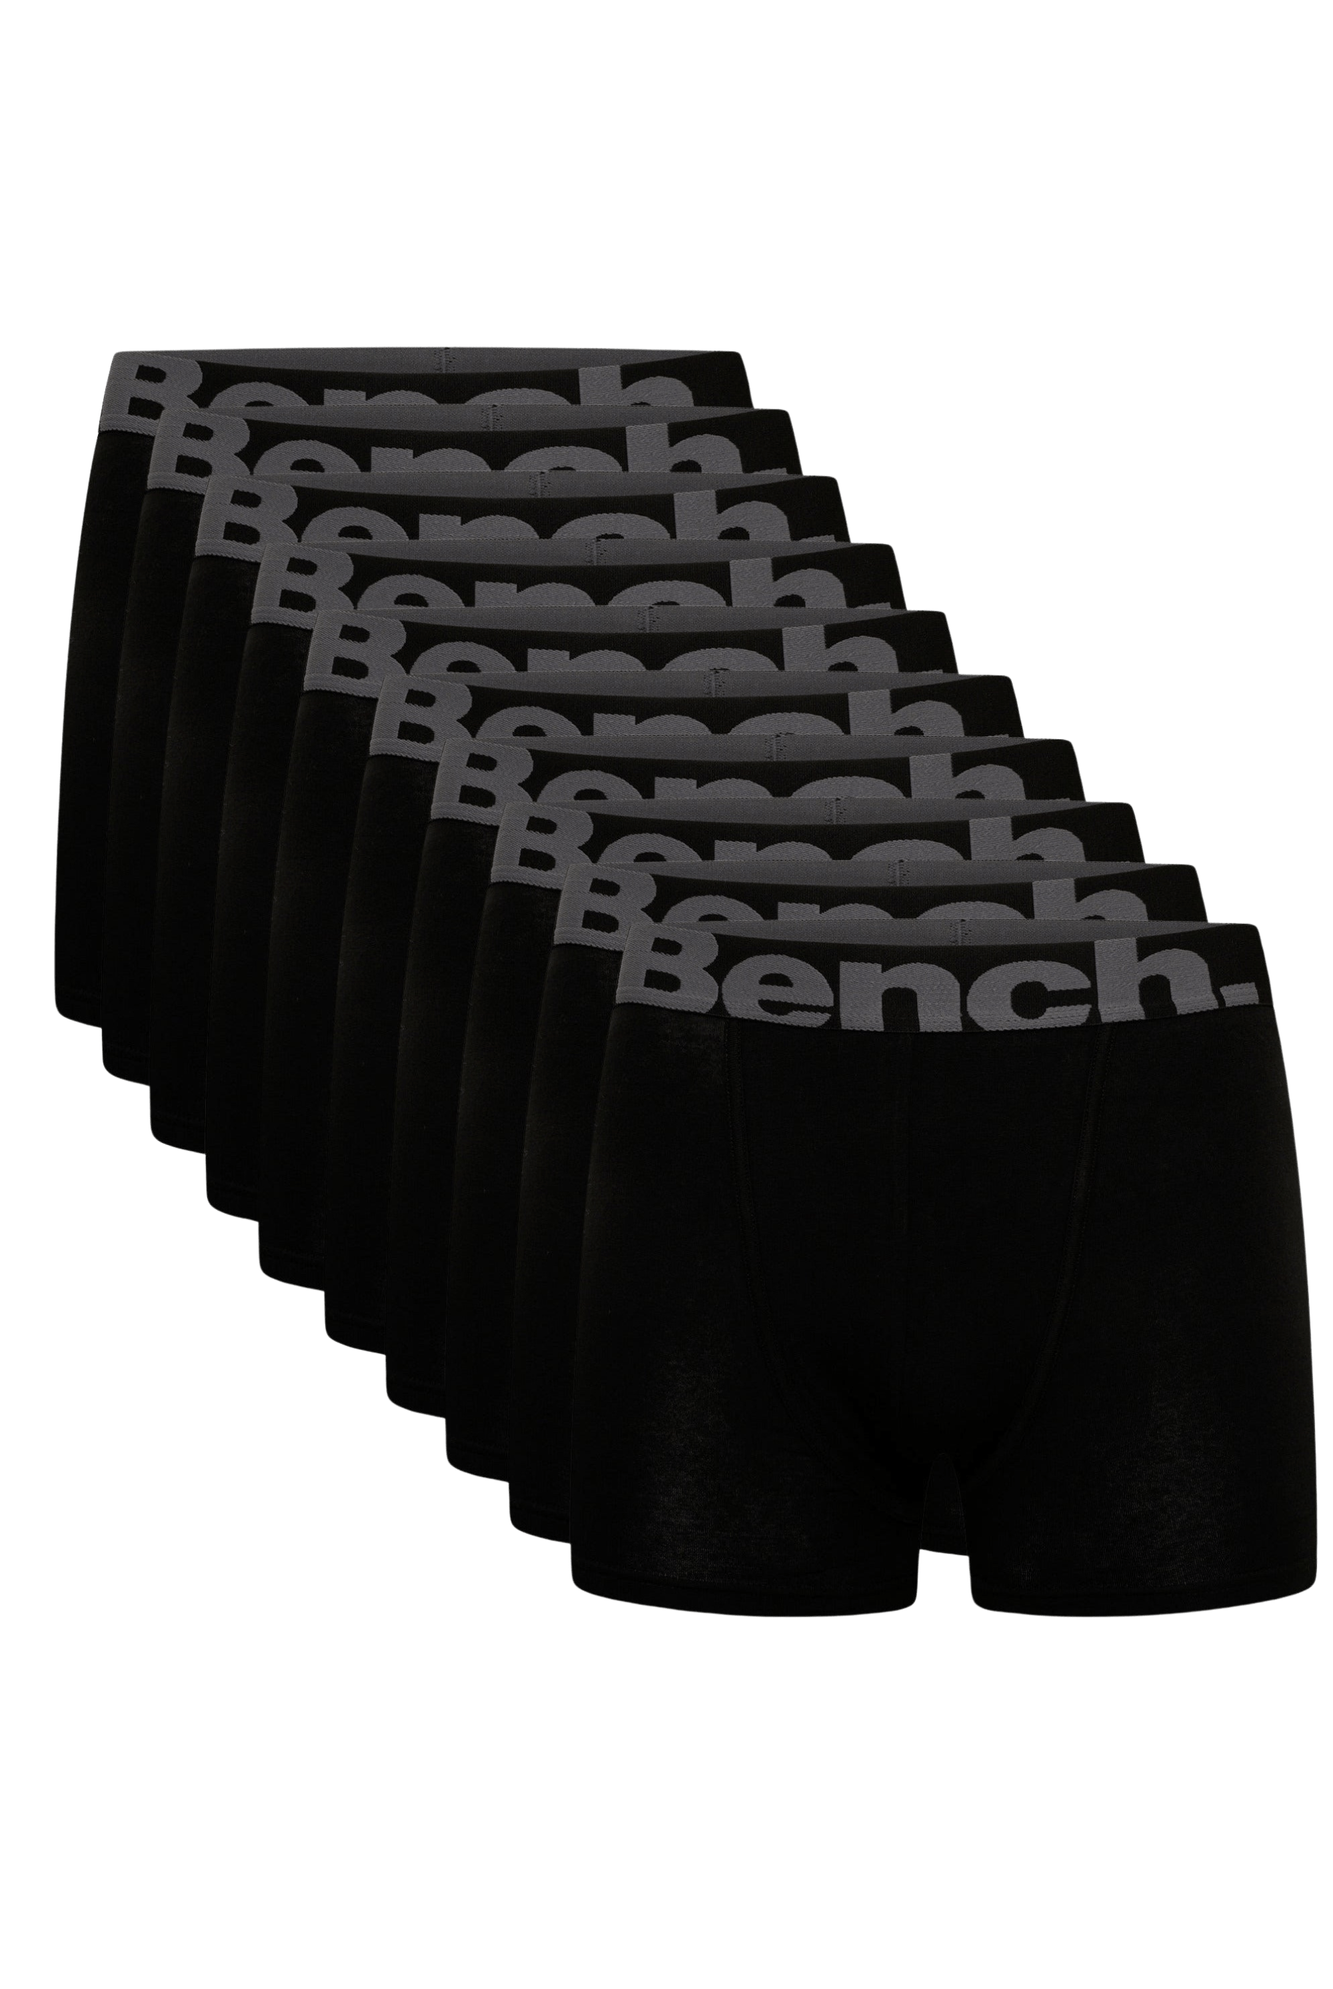 Bench Mens Conan 3 Pack Elasticated Underwear Boxers Boxer Shorts - Assorted